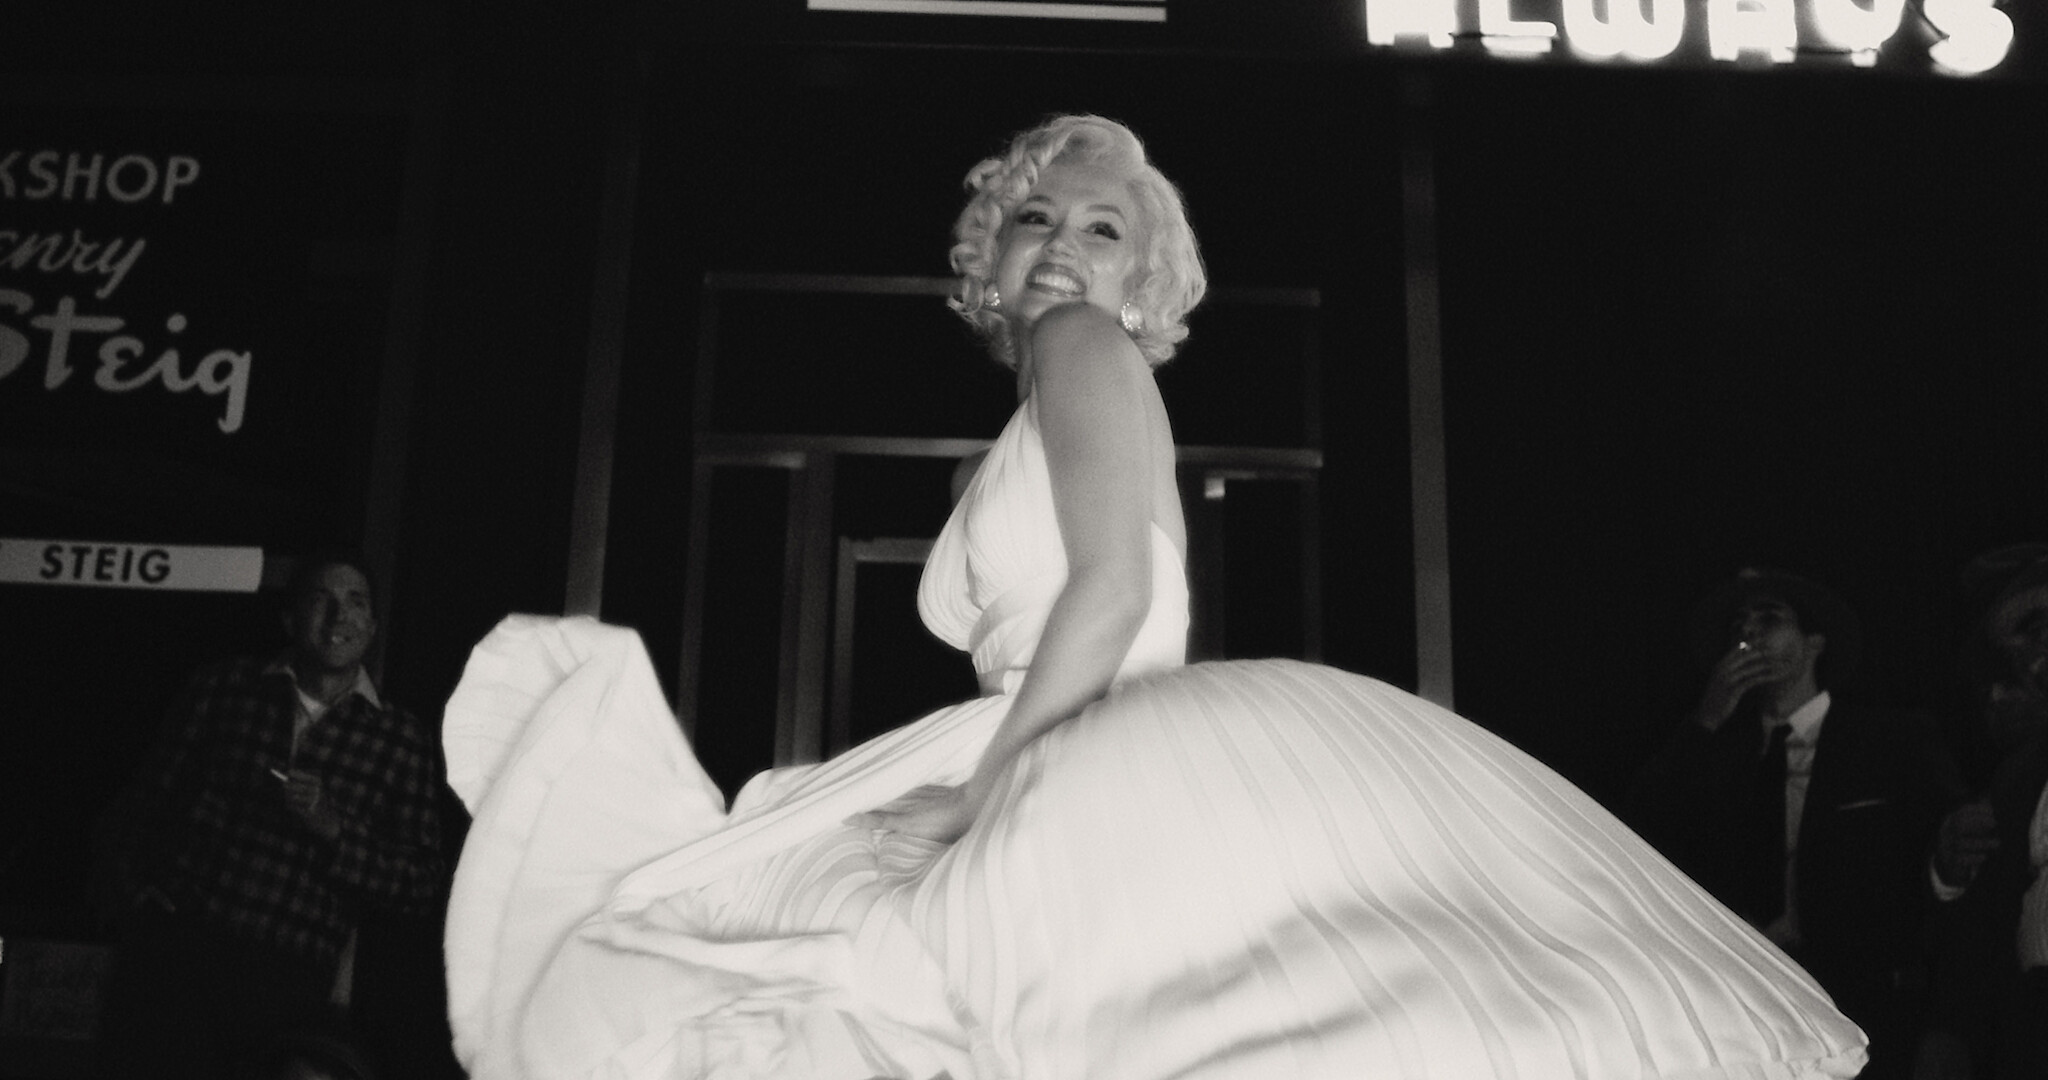 Blonde Everything You Need to Know About the New Marilyn Monroe Film